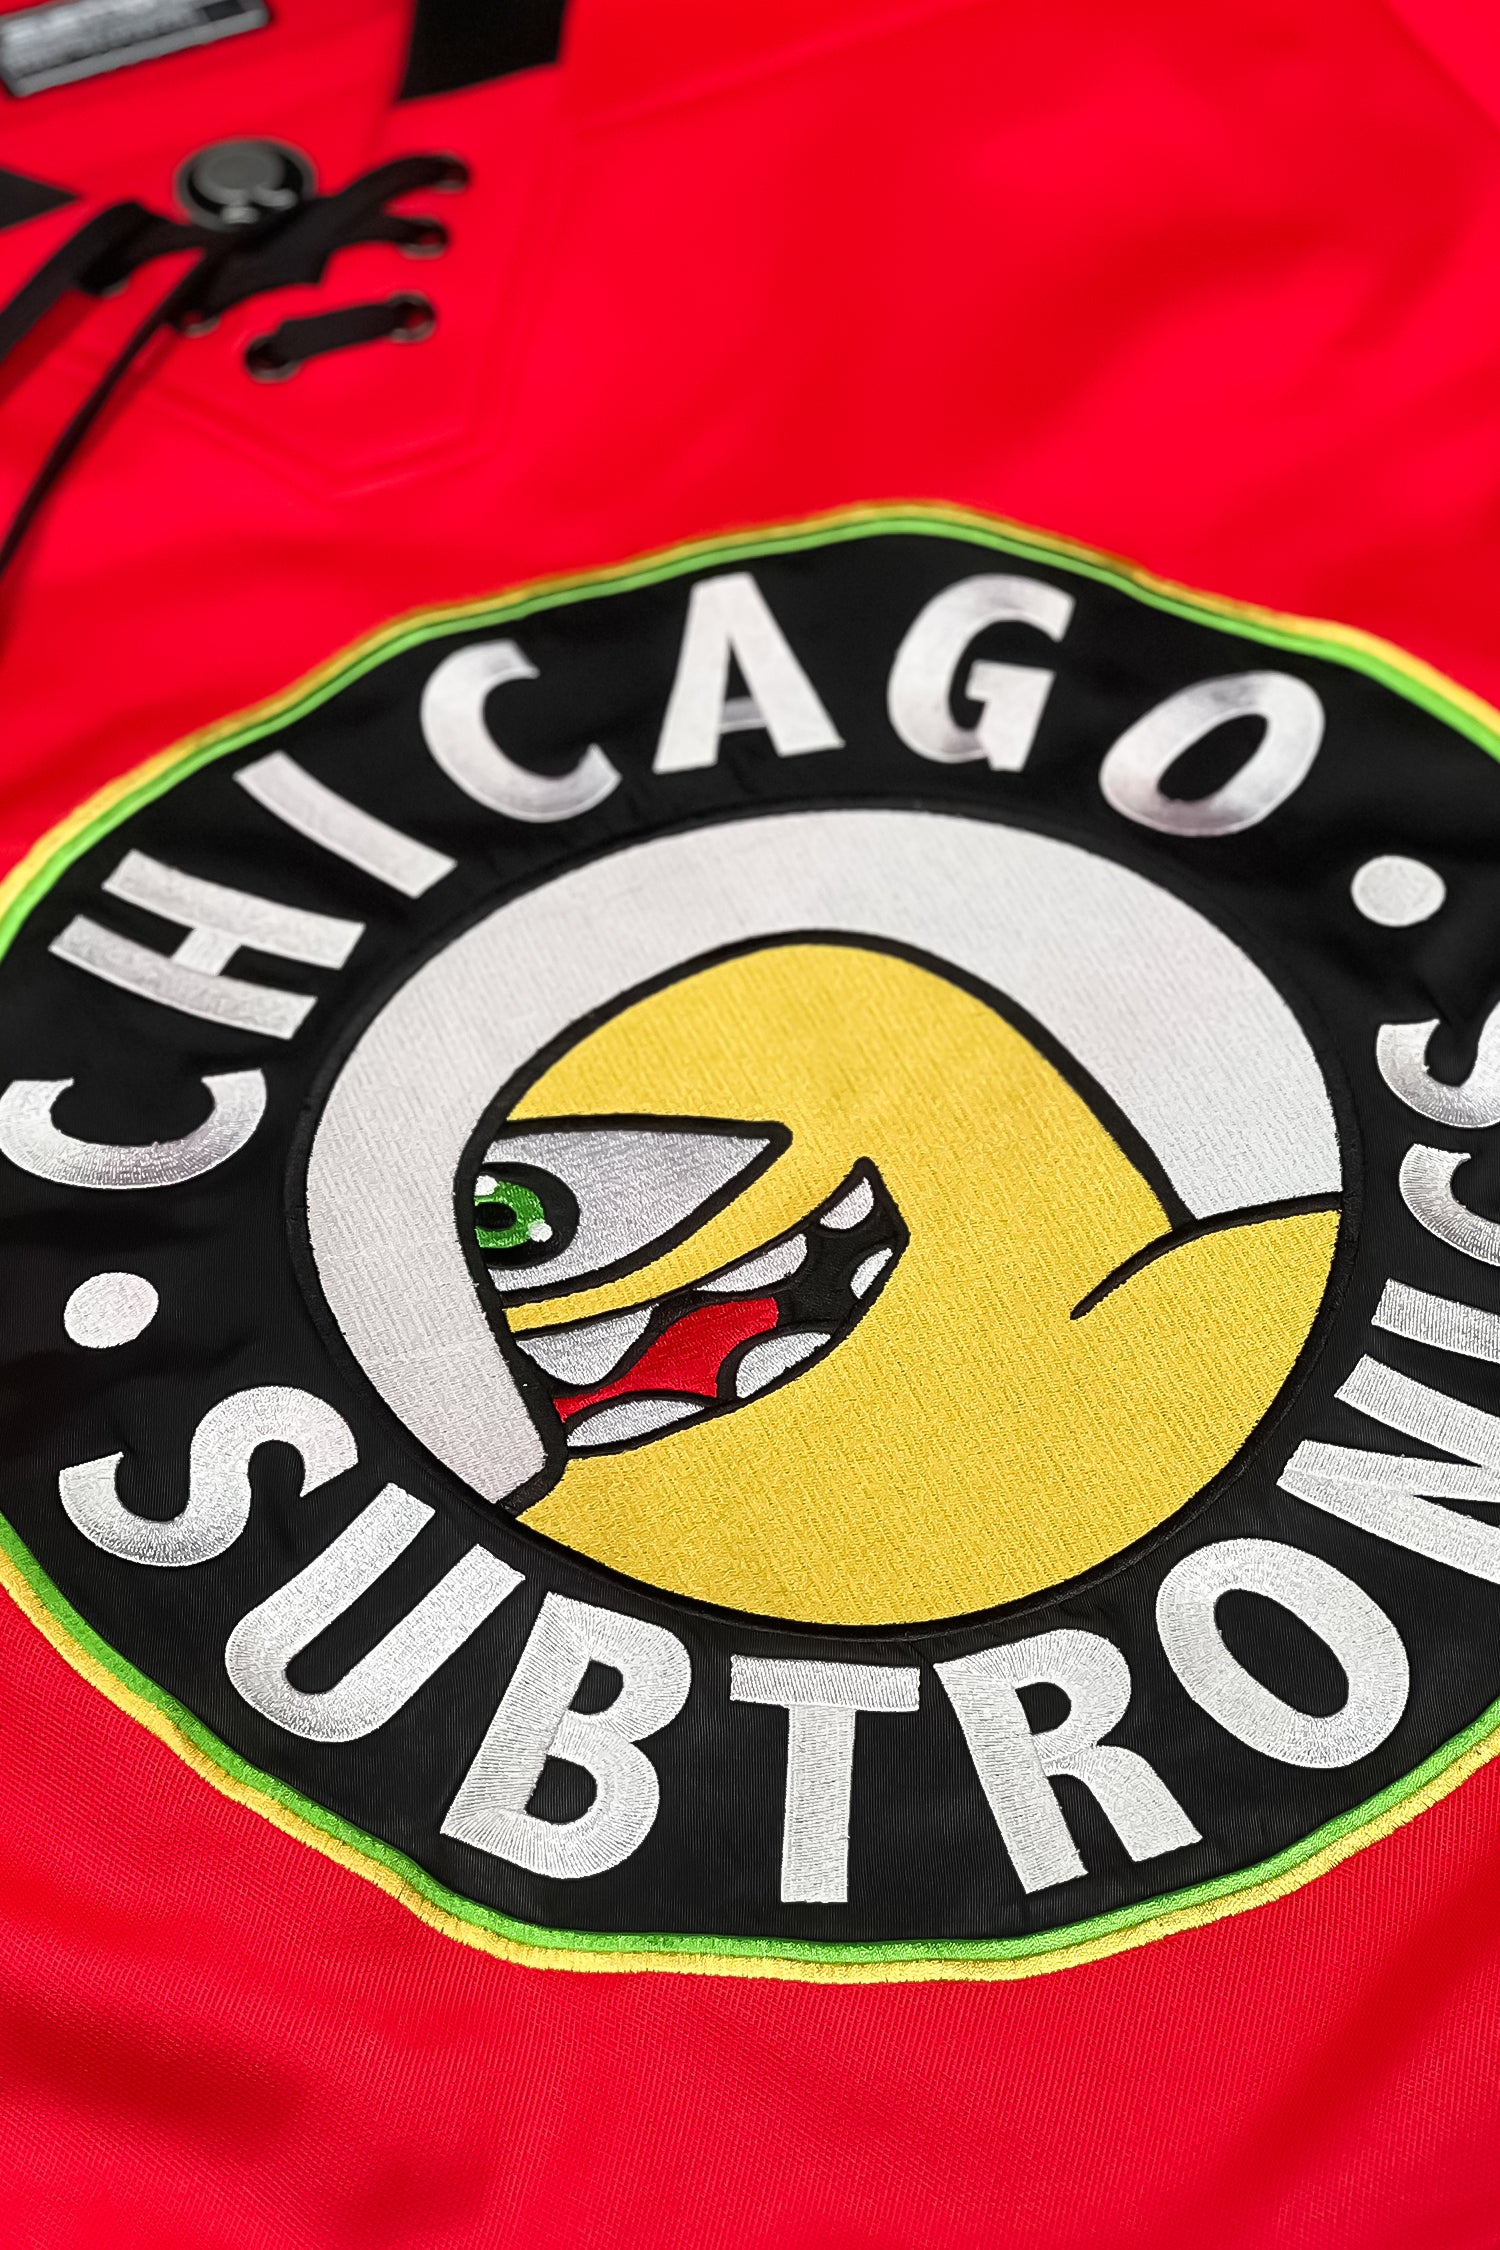 Subtronics - Chicago Event - Official Hockey Jersey